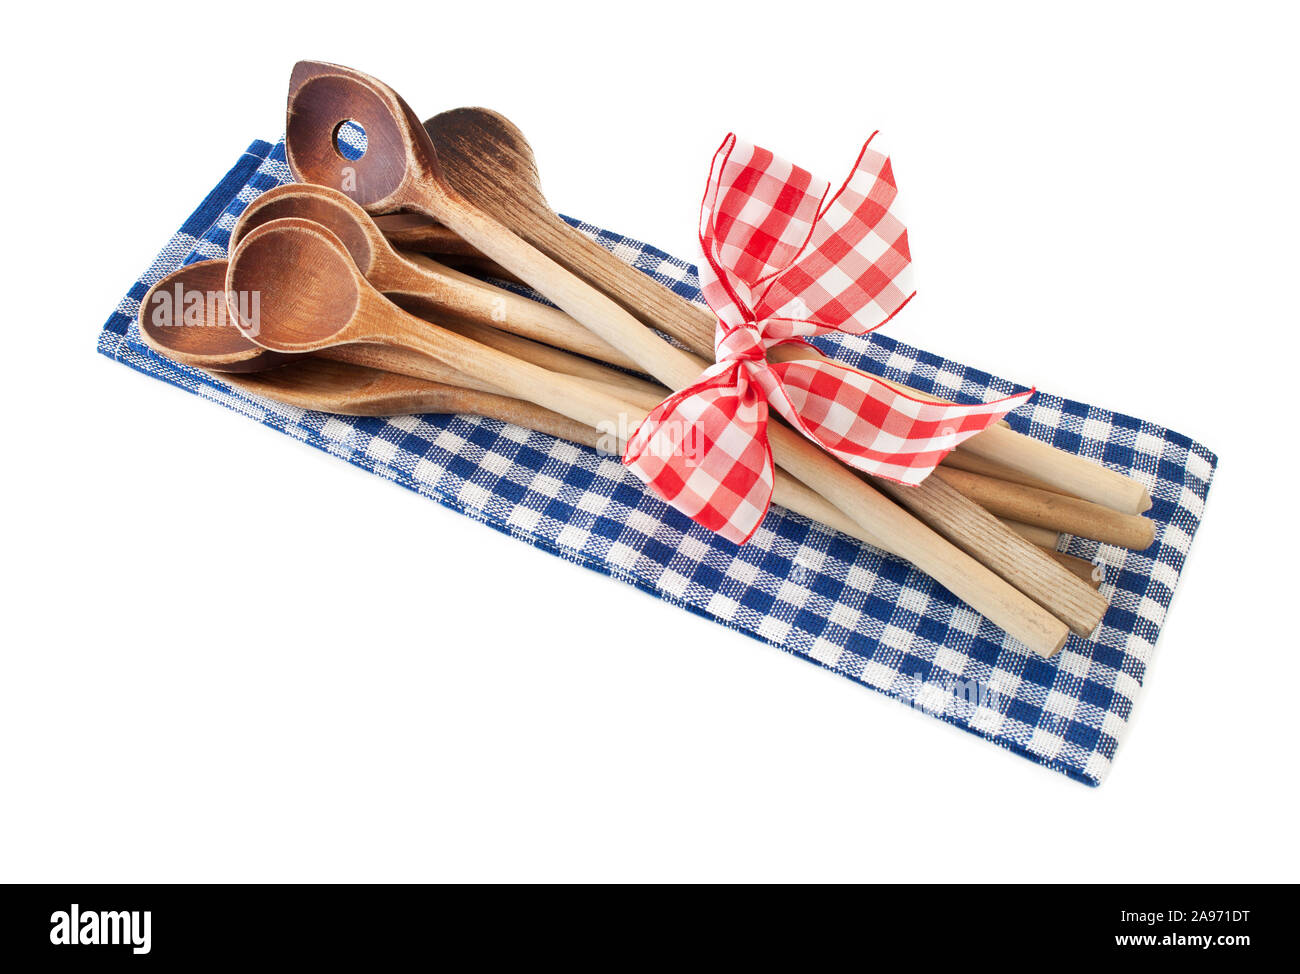 Wooden spoons Stock Photo